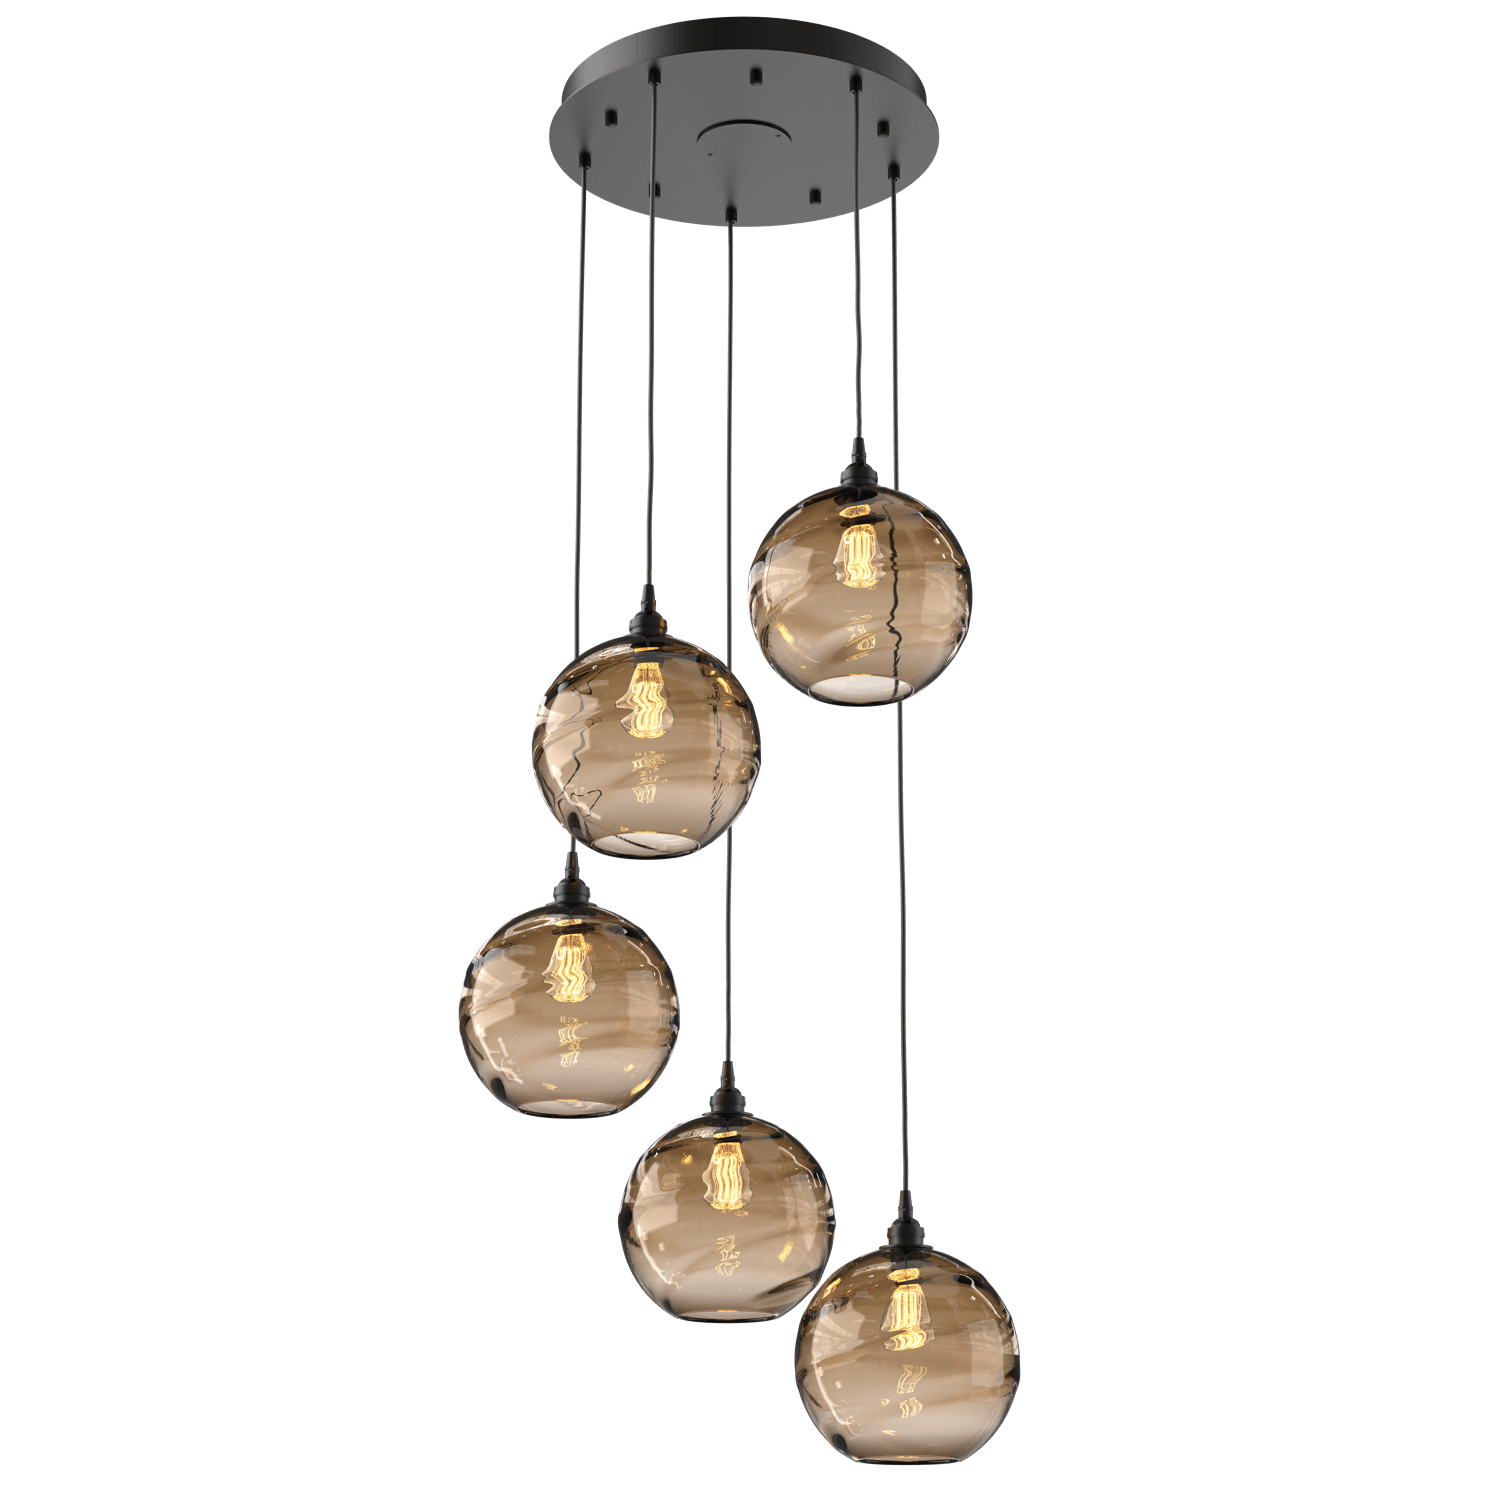 CHB0047-05-MB-OB-Hammerton-Studio-Optic-Blown-Glass-Terra-5-light-round-pendant-chandelier-with-matte-black-finish-and-optic-bronze-blown-glass-shades-and-incandescent-lamping